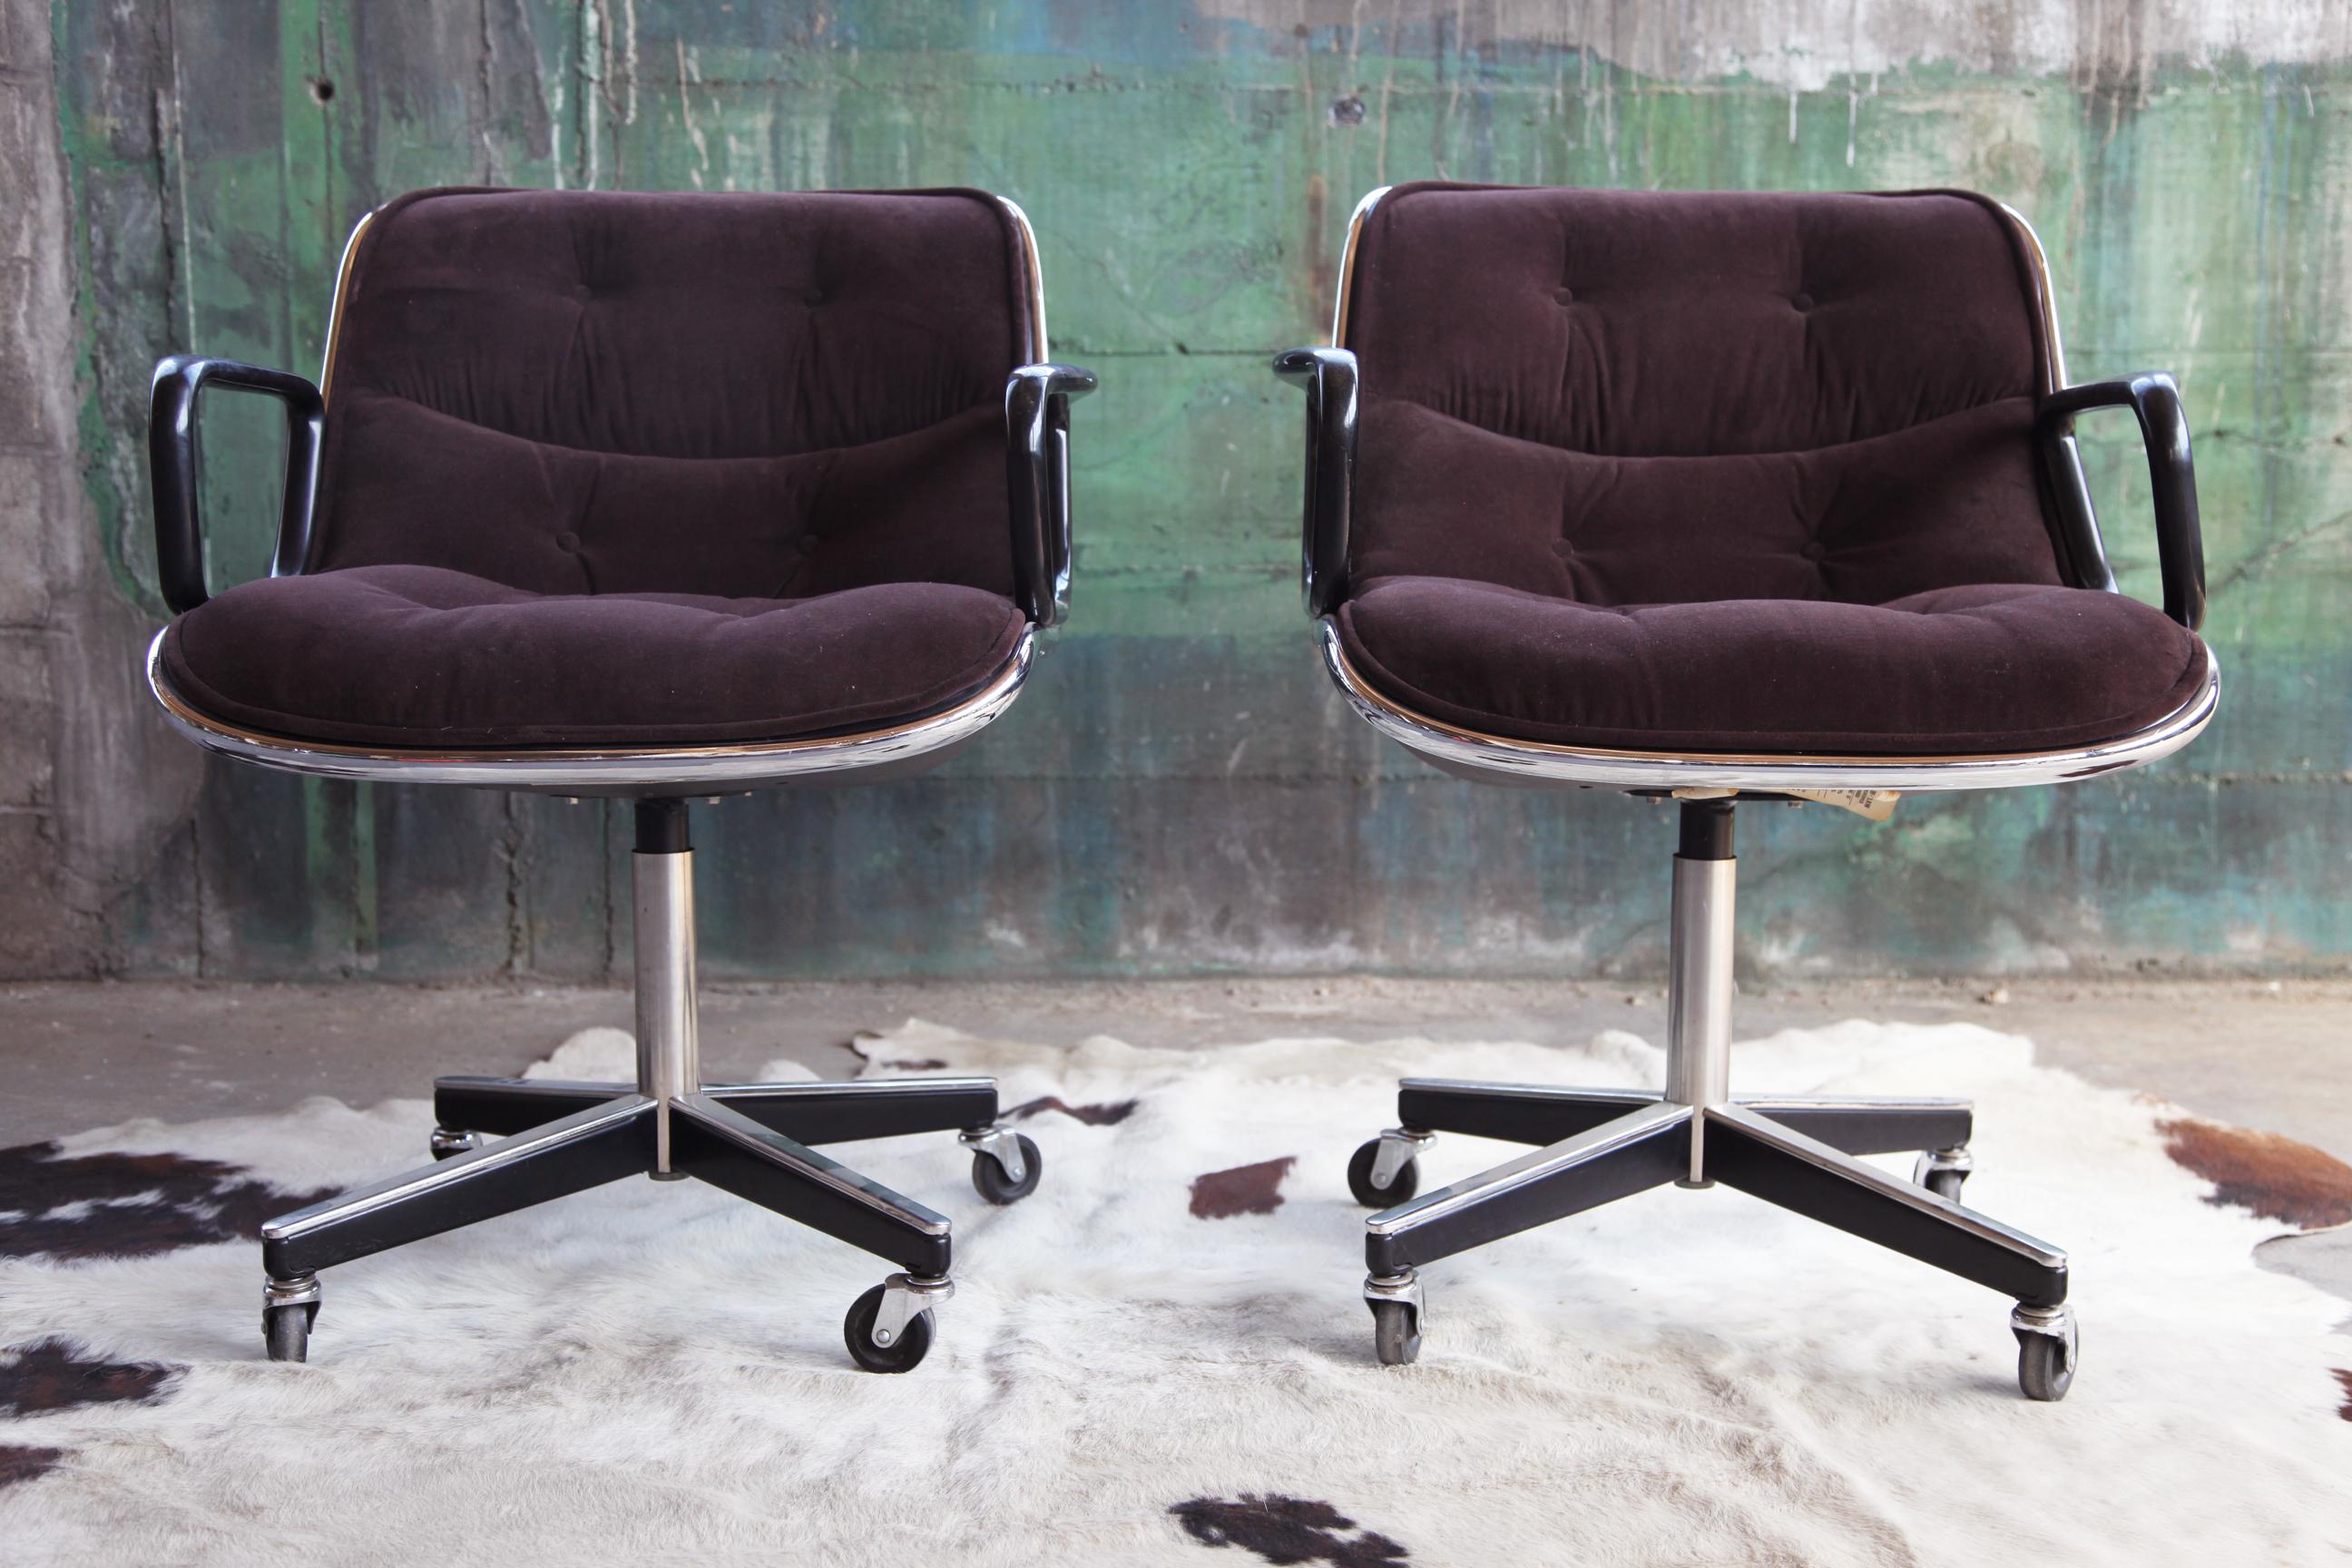 1973 Knoll Executive Chrome and Tufted Velour Office Chair For Sale 1